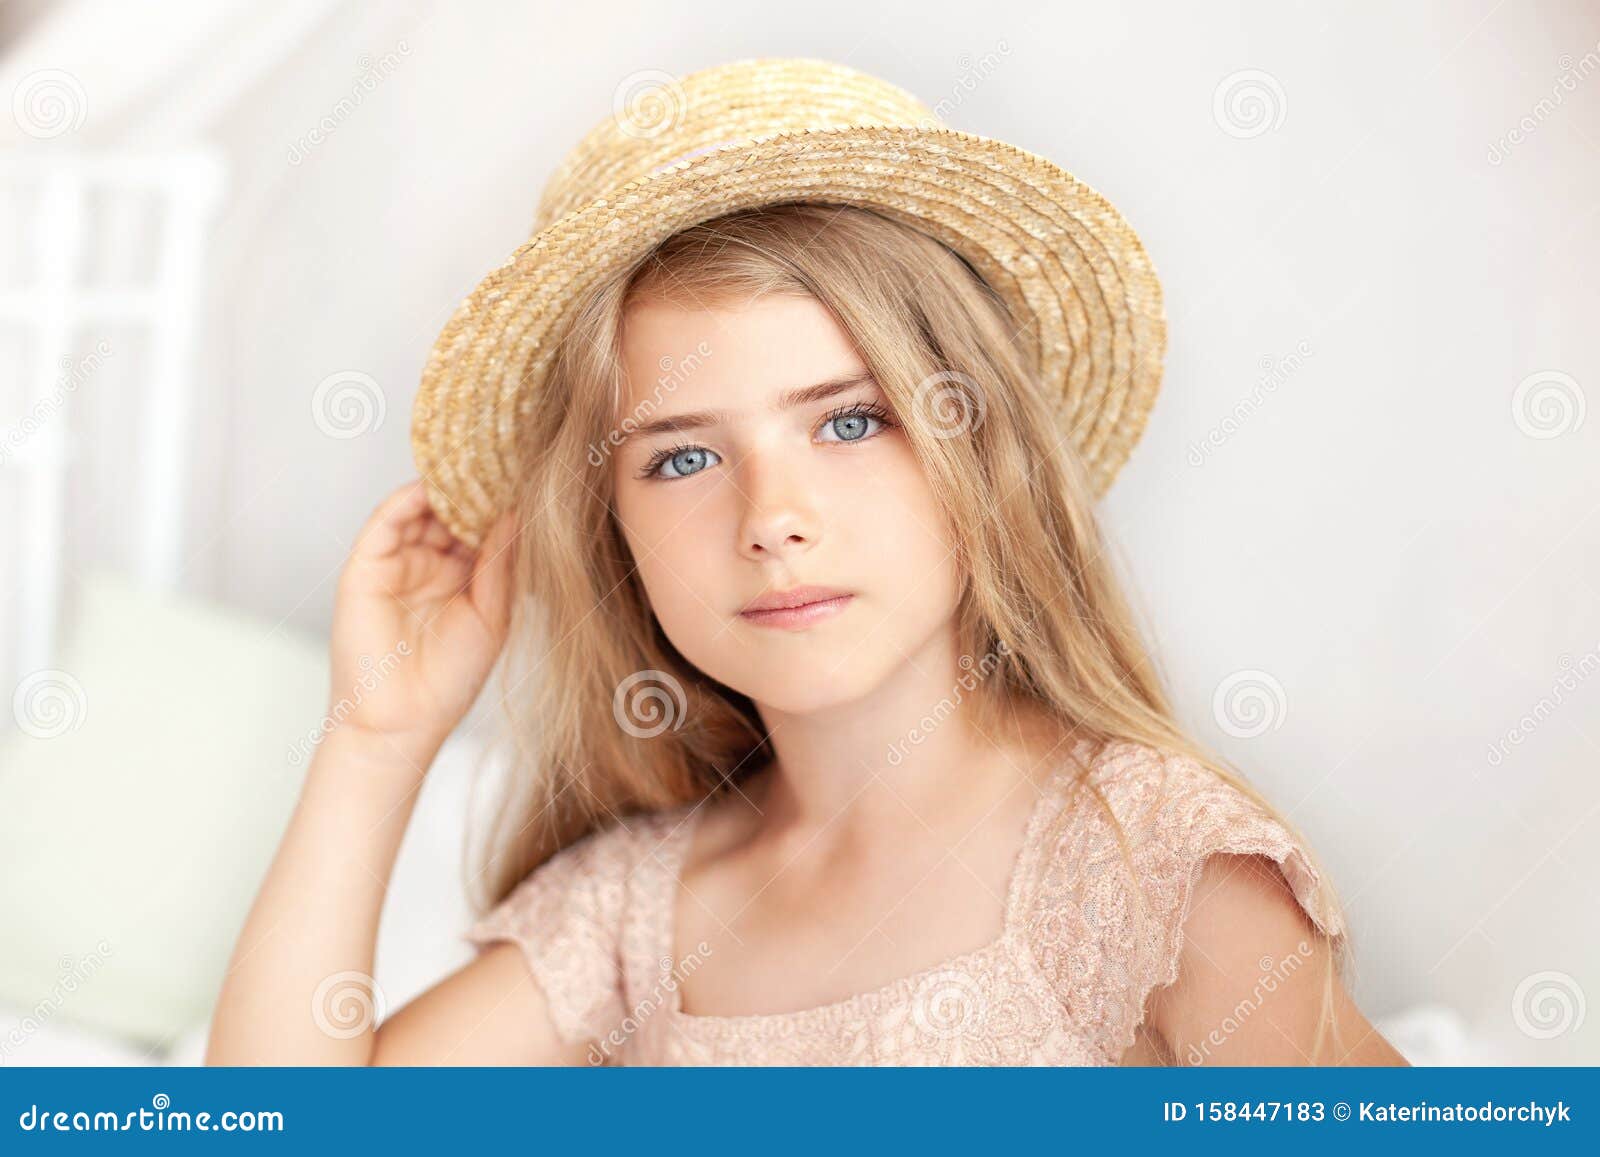 Portrait of a Cute Girl in a Straw Hat. Thoughtful Little Blonde ...